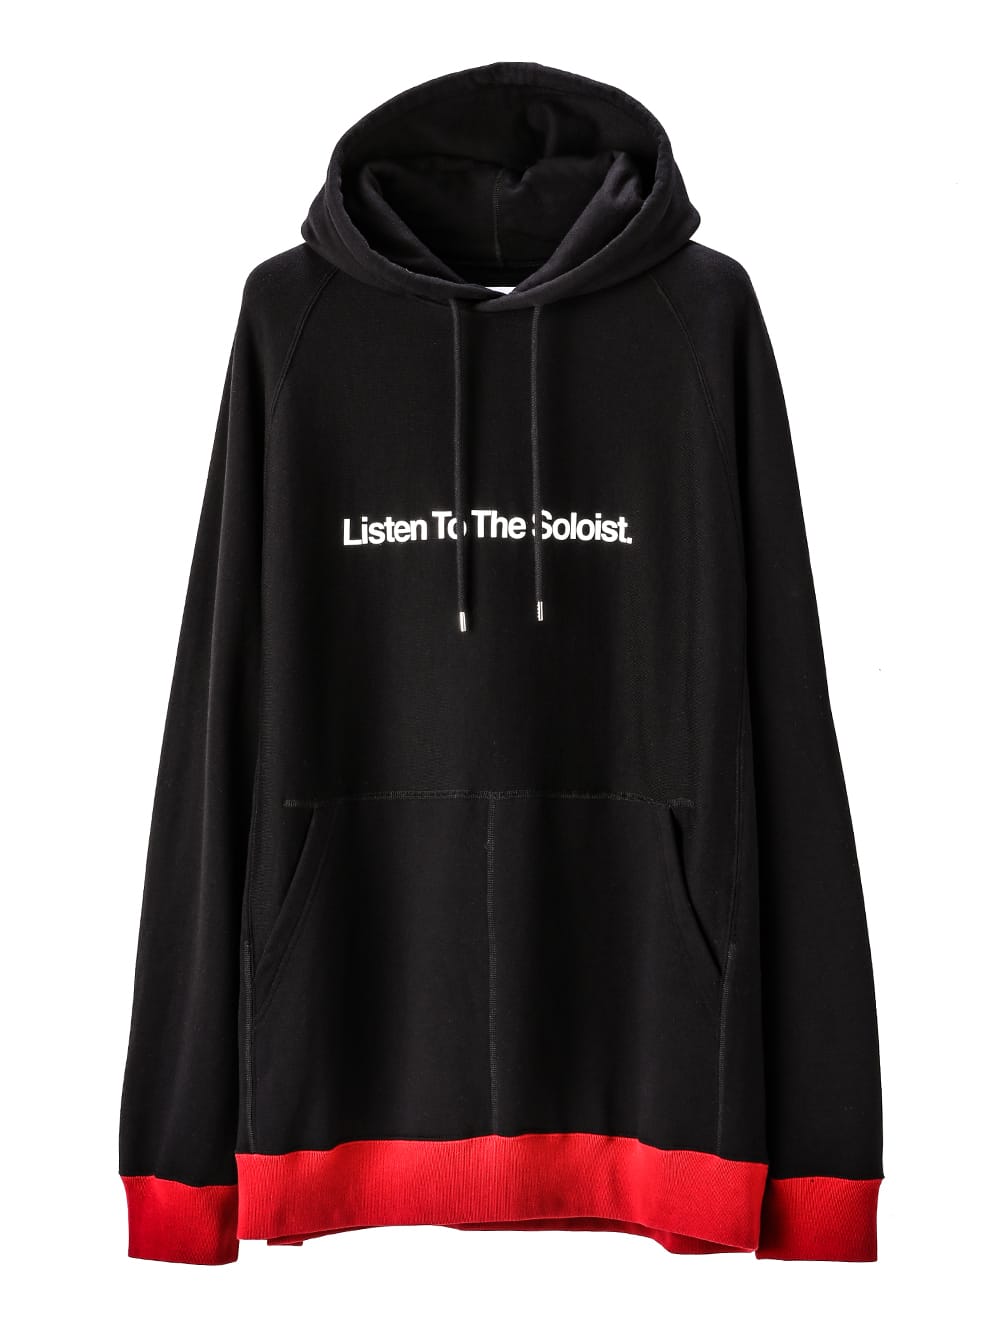 sxc.0002-black×red Listen To The Soloist.(oversized bicolor hoodie 